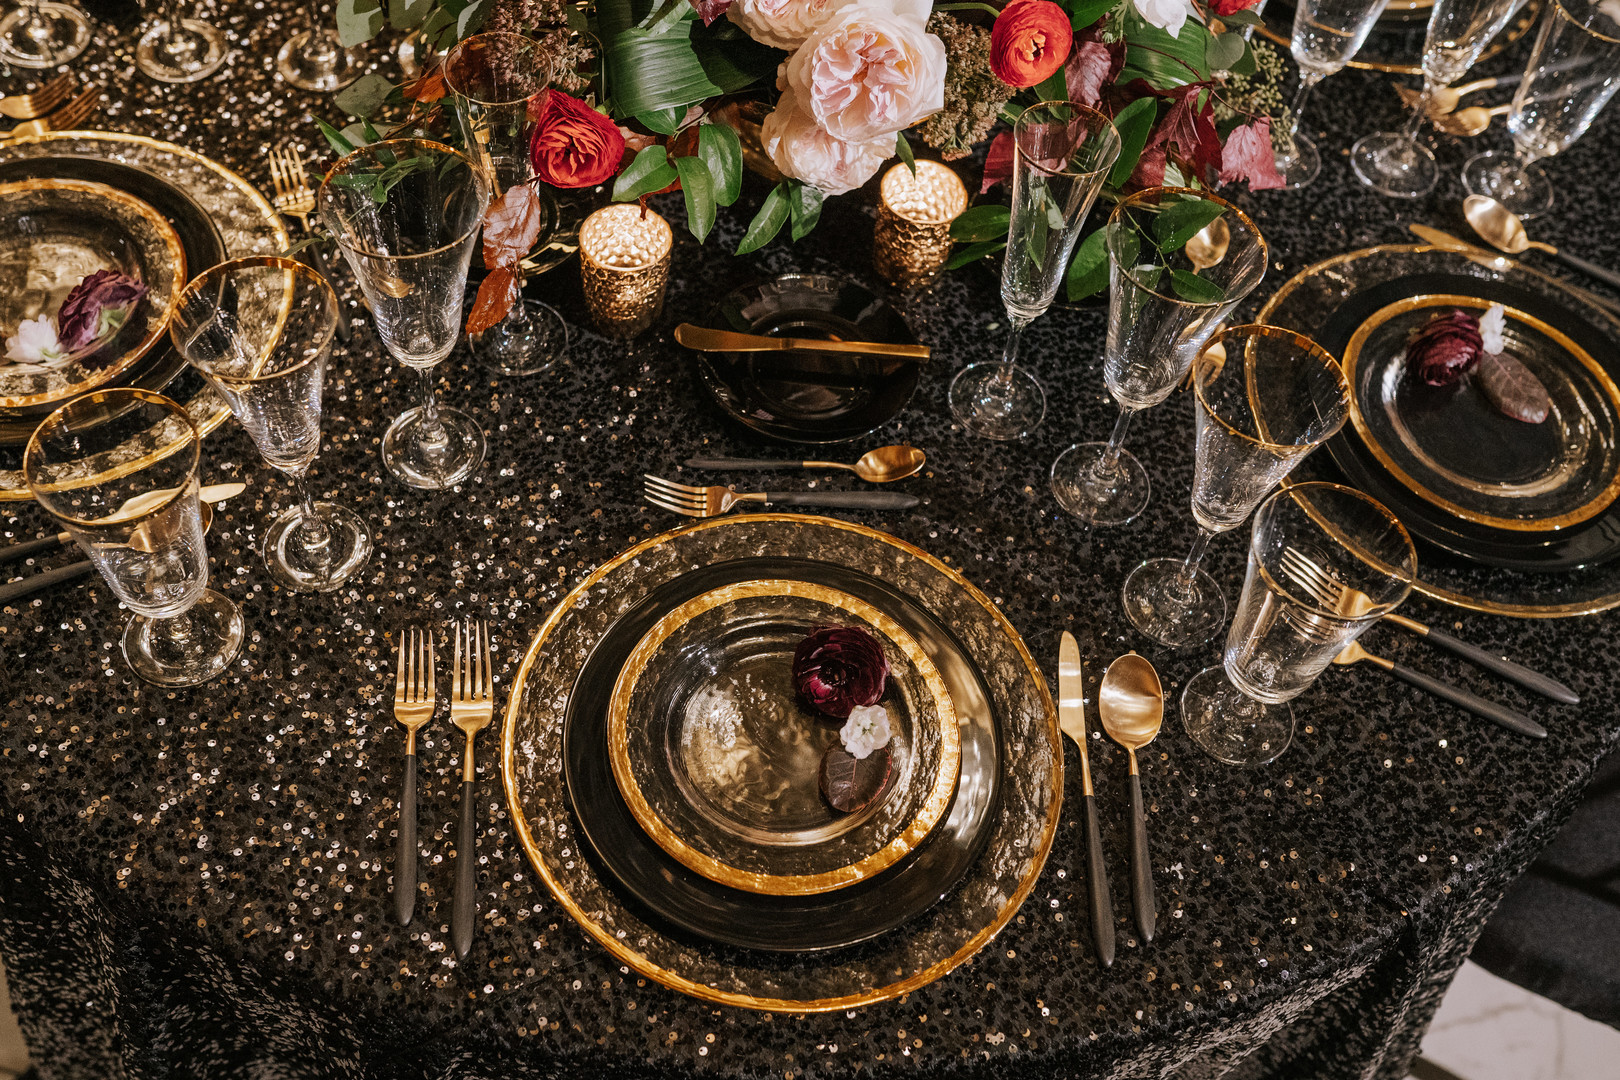 Black and Gold Place Settings | 1920s Wedding